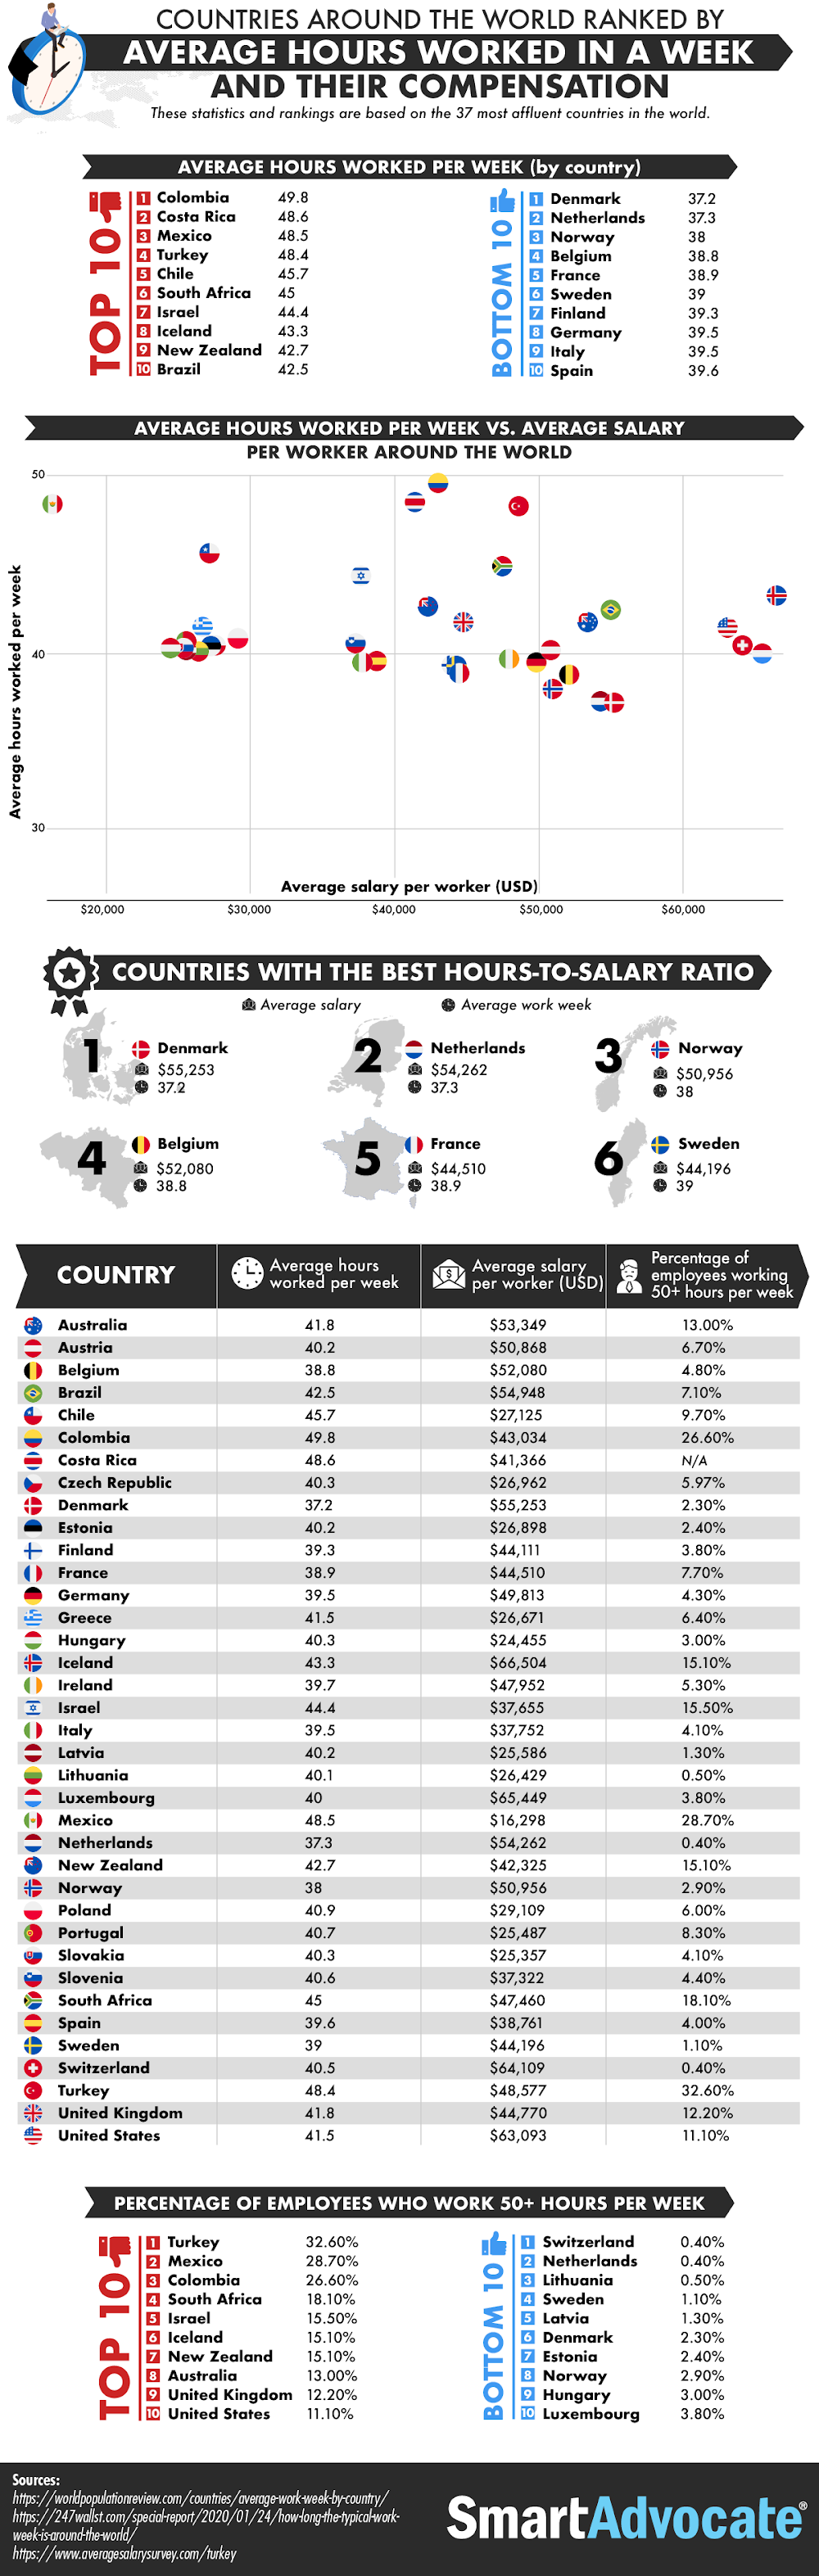 Countries Around the World Ranked by Average Hours Worked in a Week and Their Compensation